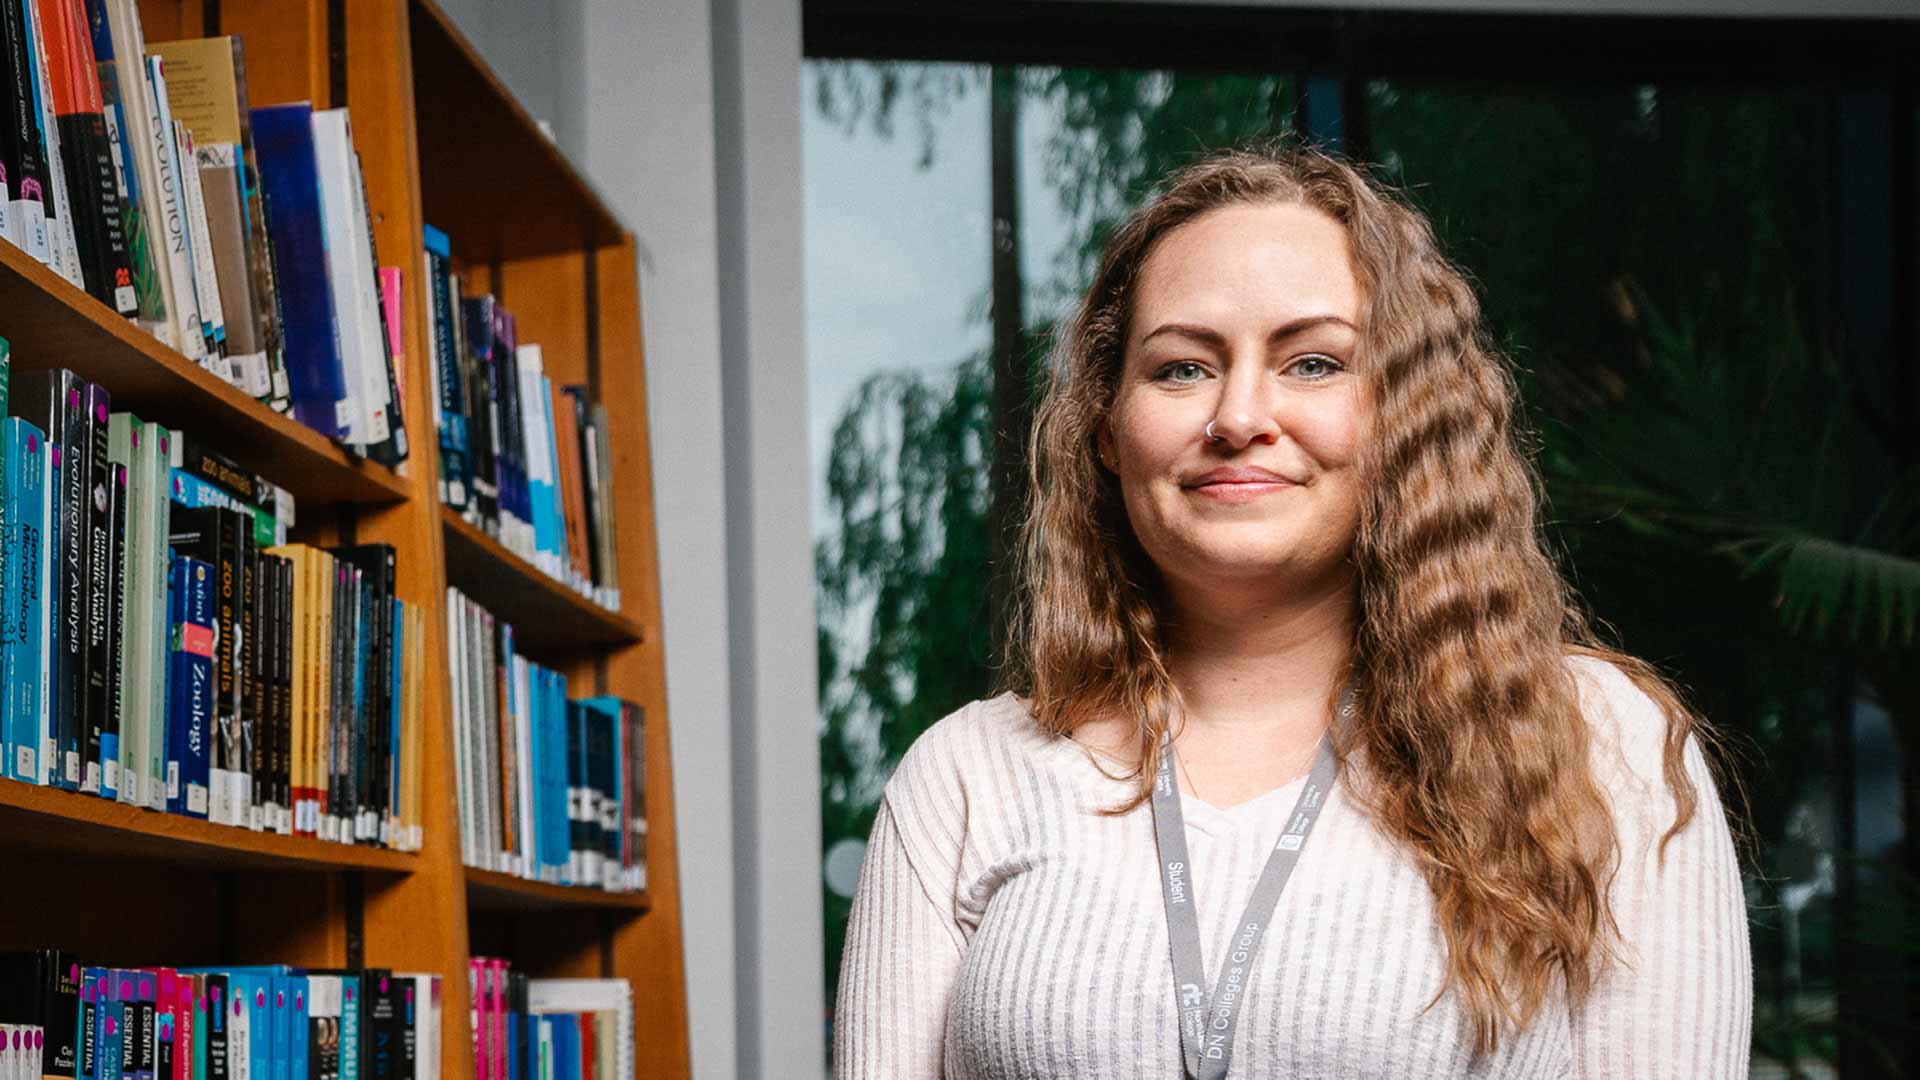 Student Karina stands smiling in front of a row of bookshelves packed with books